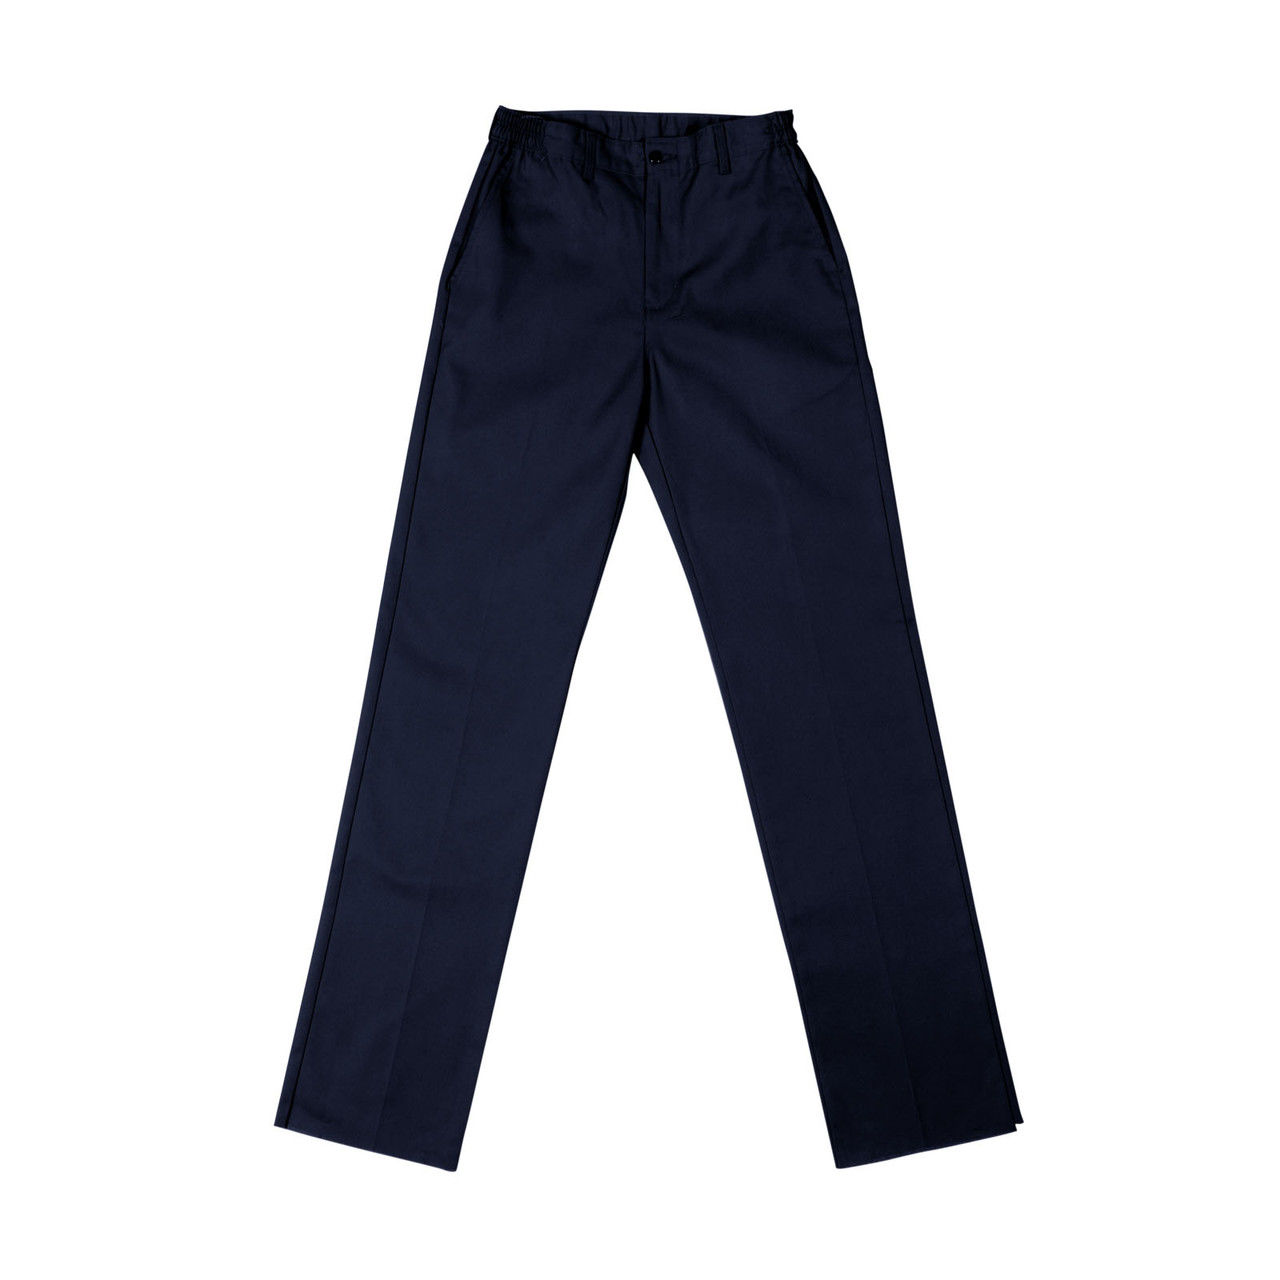 From where are the P26 Women's navy blue work pants shipped?